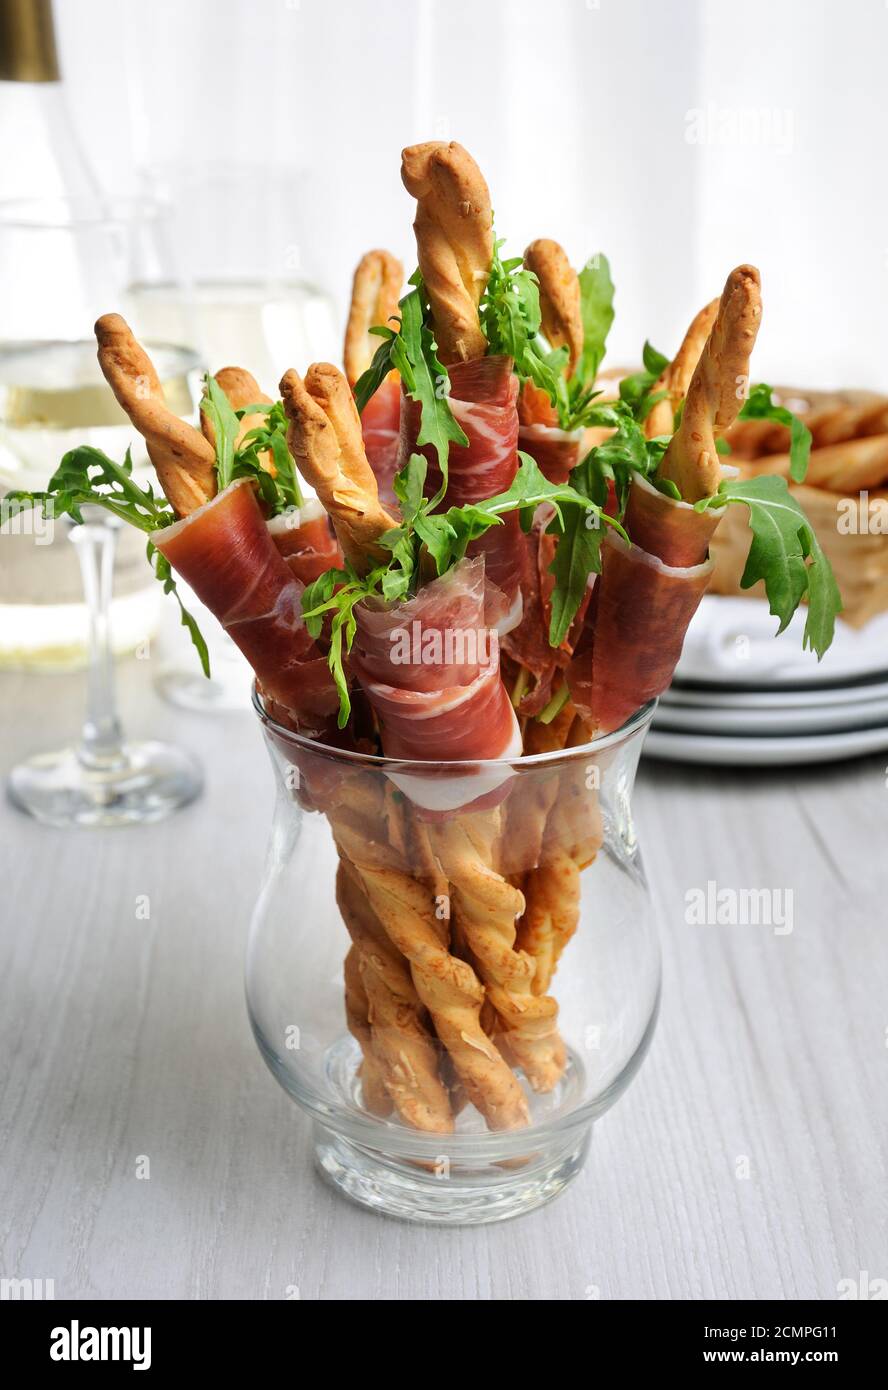 Grissini - bread sticks with Parmesan, wrapped with a piece of prosciutto and arugula. Italian dish Stock Photo